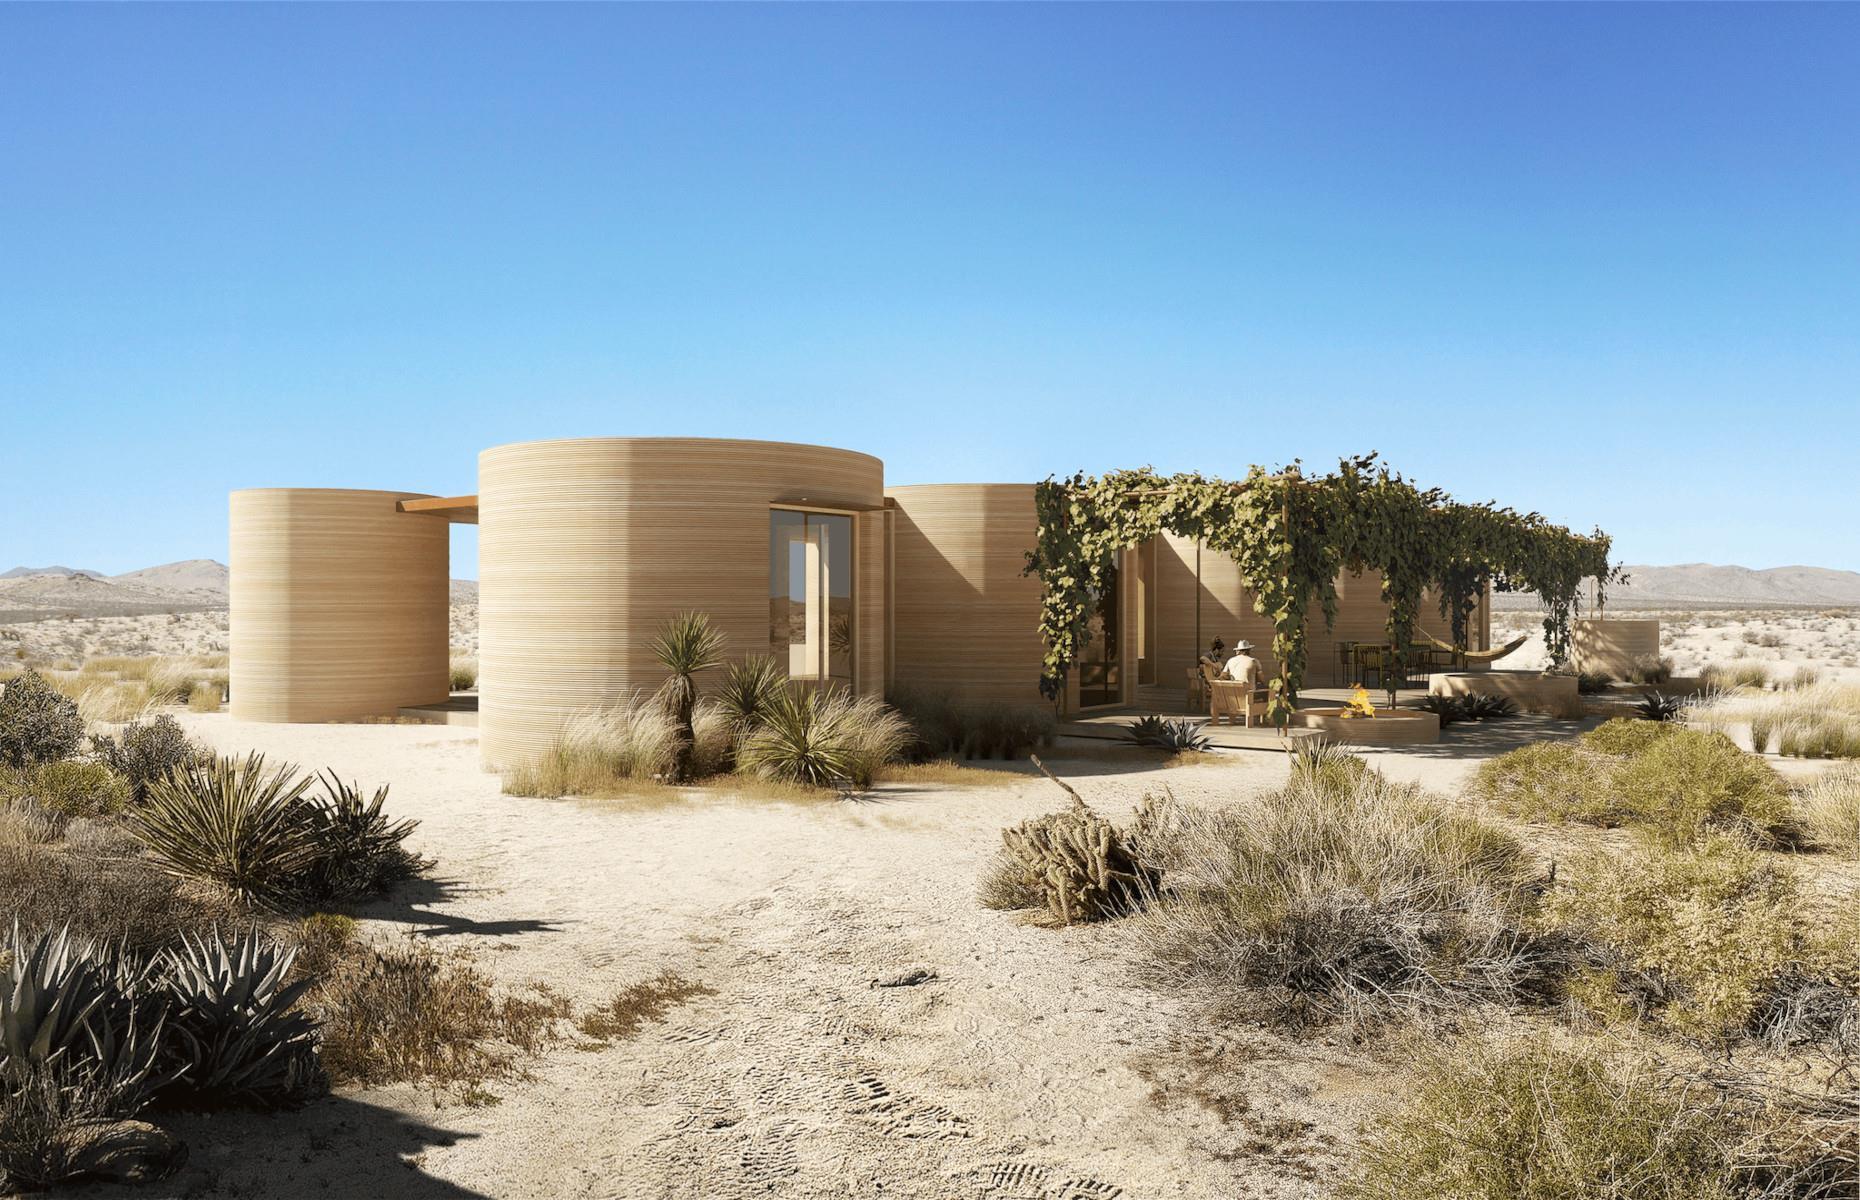 <p>Looking for your next house? Well, this futuristic town in West Texas known as ‘Sunday Homes’ is accepting applications. Located in the bohemian desert community of Marfa, this unique, multifaceted project will offer a range of 3D-printed homes, as well as a 3D-printed hotel<span>—</span>an international first. Is this experimenting gone too far, or are these pricey 3D pads the future of residential home building? </p>  <p>Click or scroll through and let’s take a look around this fascinating development to find out...</p>